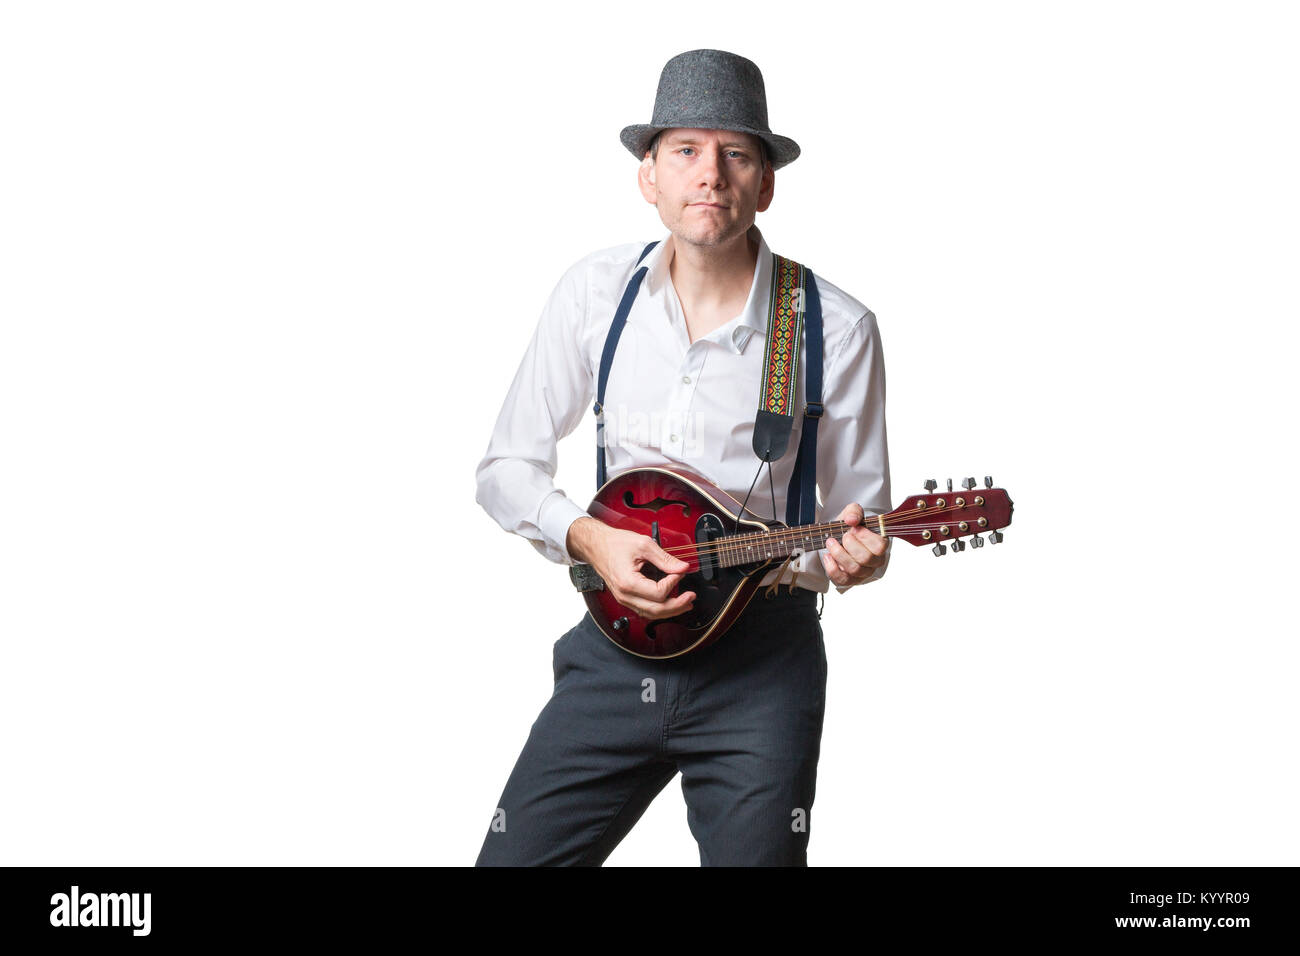 Man with hat plays the mandolin Stock Photo